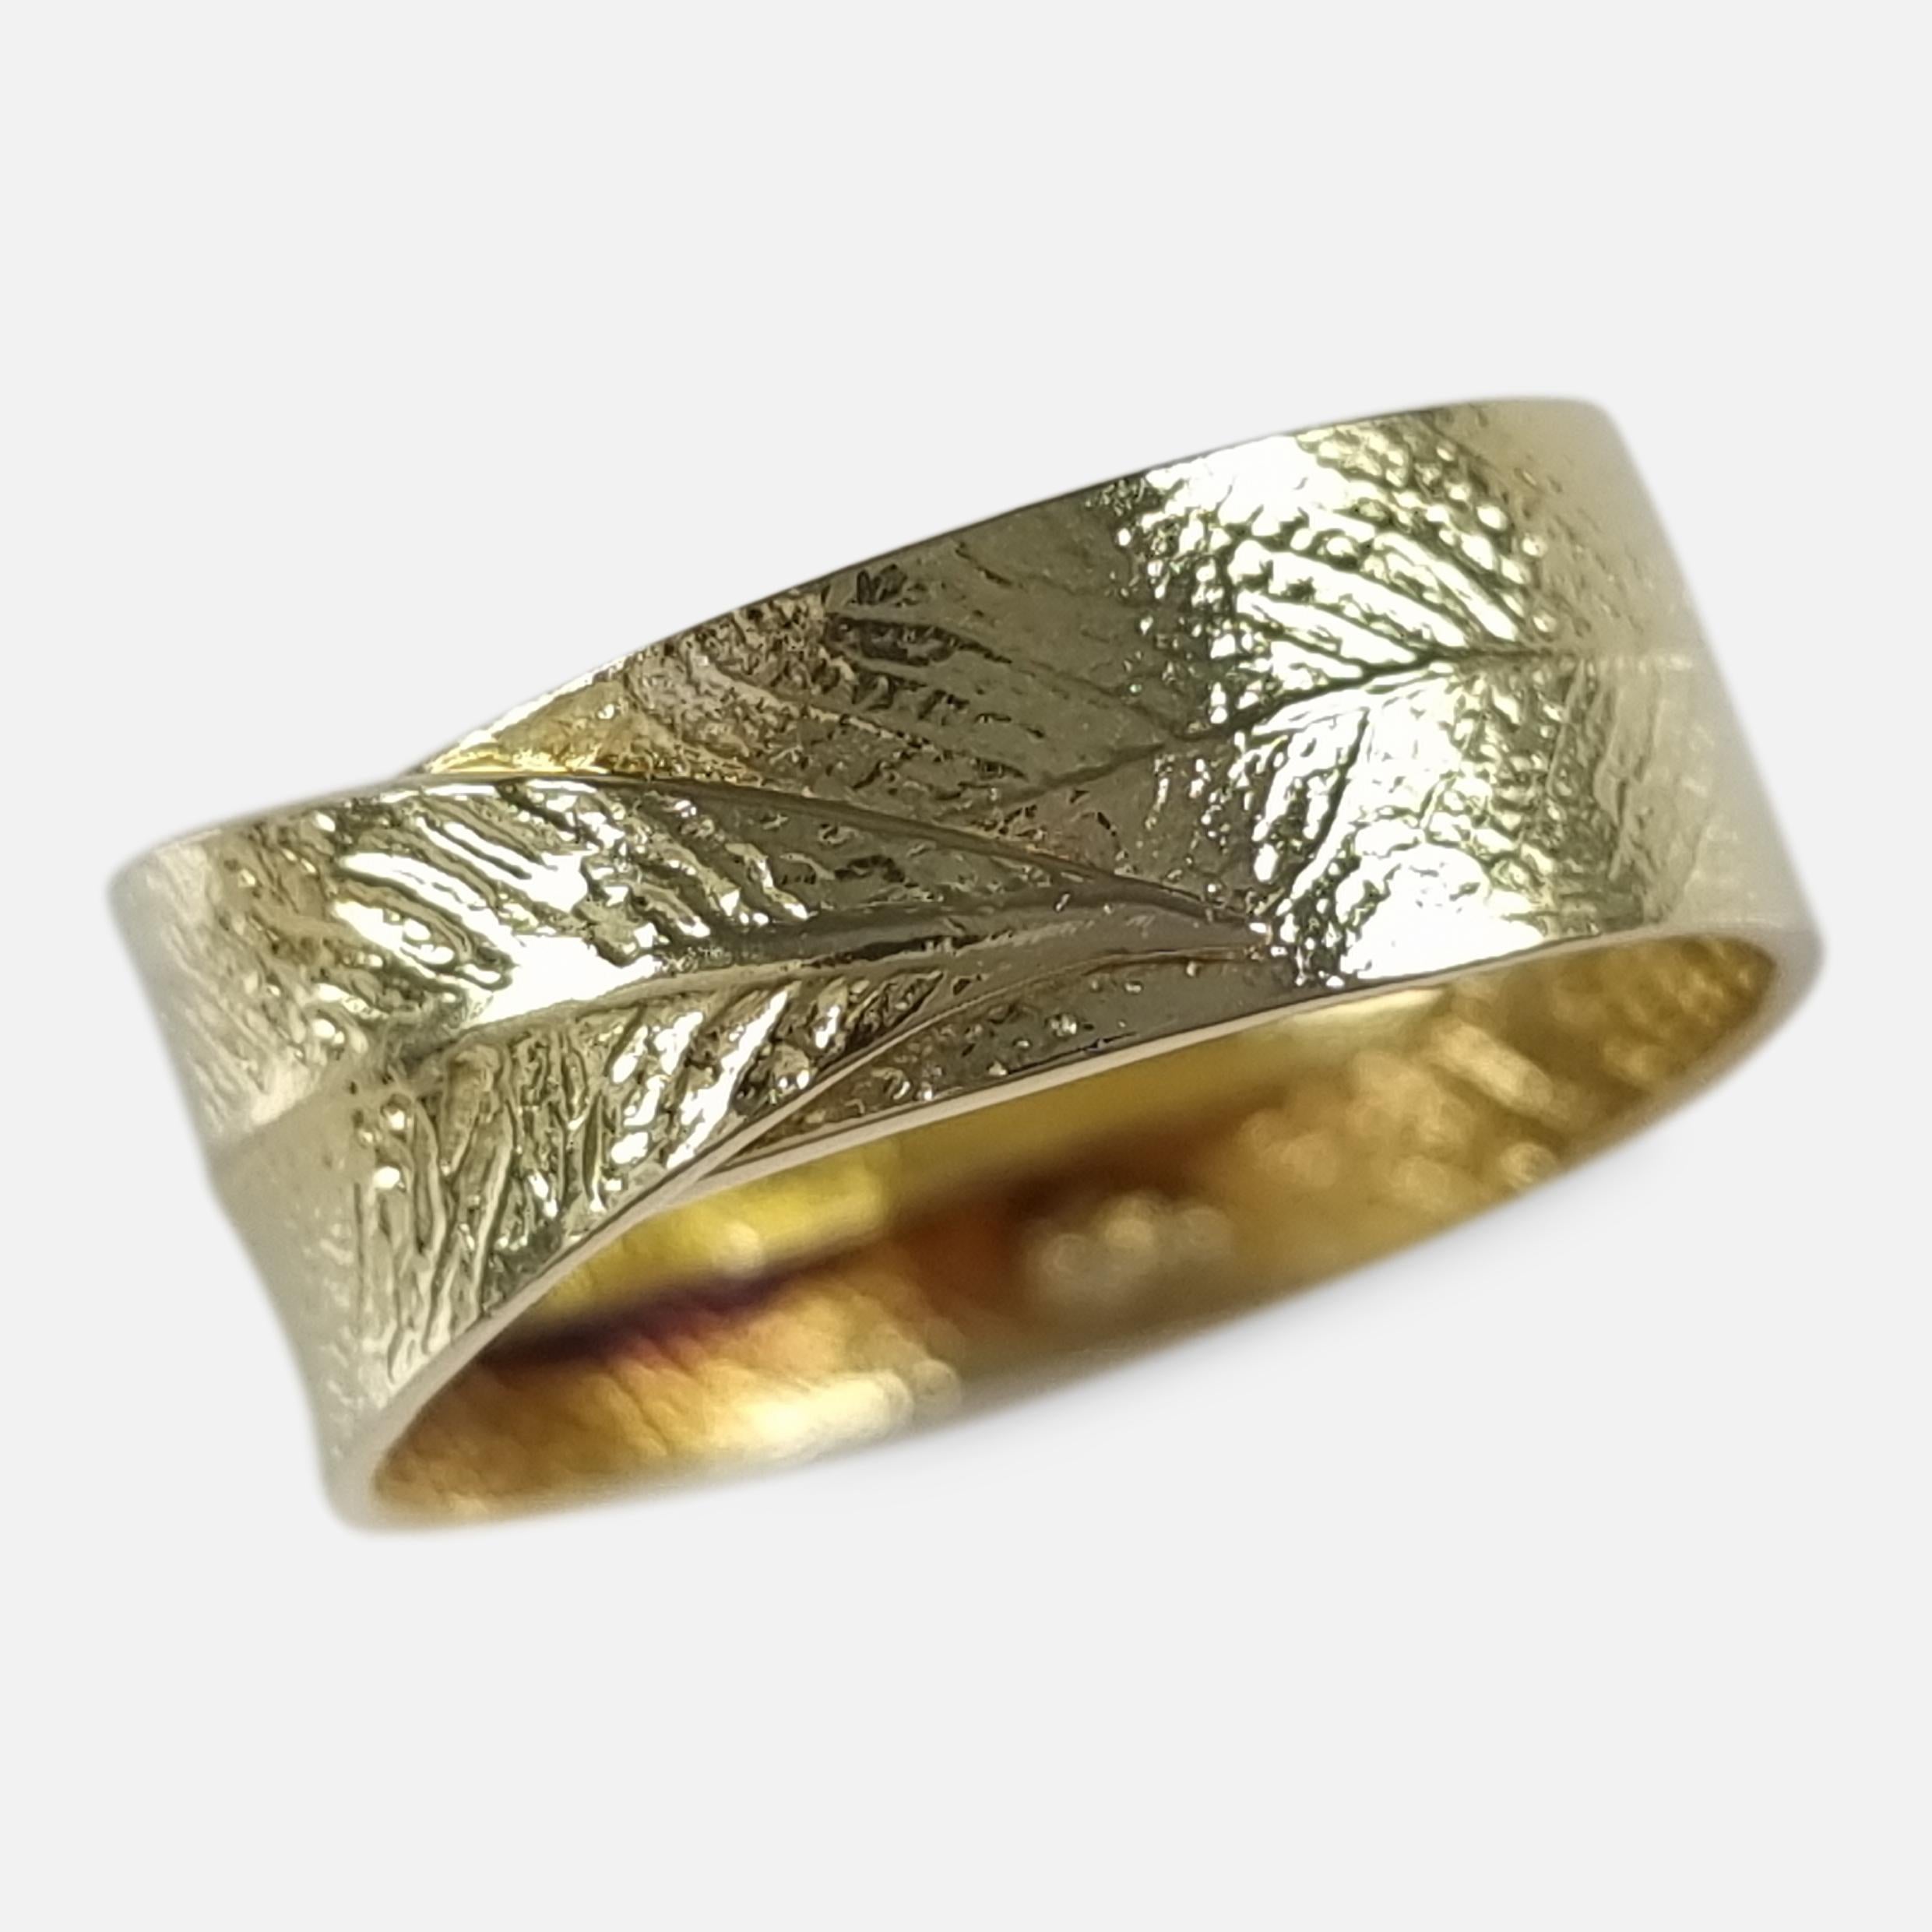 An 18ct yellow gold leaf ring by H.Stern. The ring is of wraparound form, decorated with fine leaf detailing.

Hallmarked with the Common Control Mark for 18ct gold.

Assay: - .750 (18ct gold).

Period: - Modern.

Maker: - H.Stern.

Measurement: -